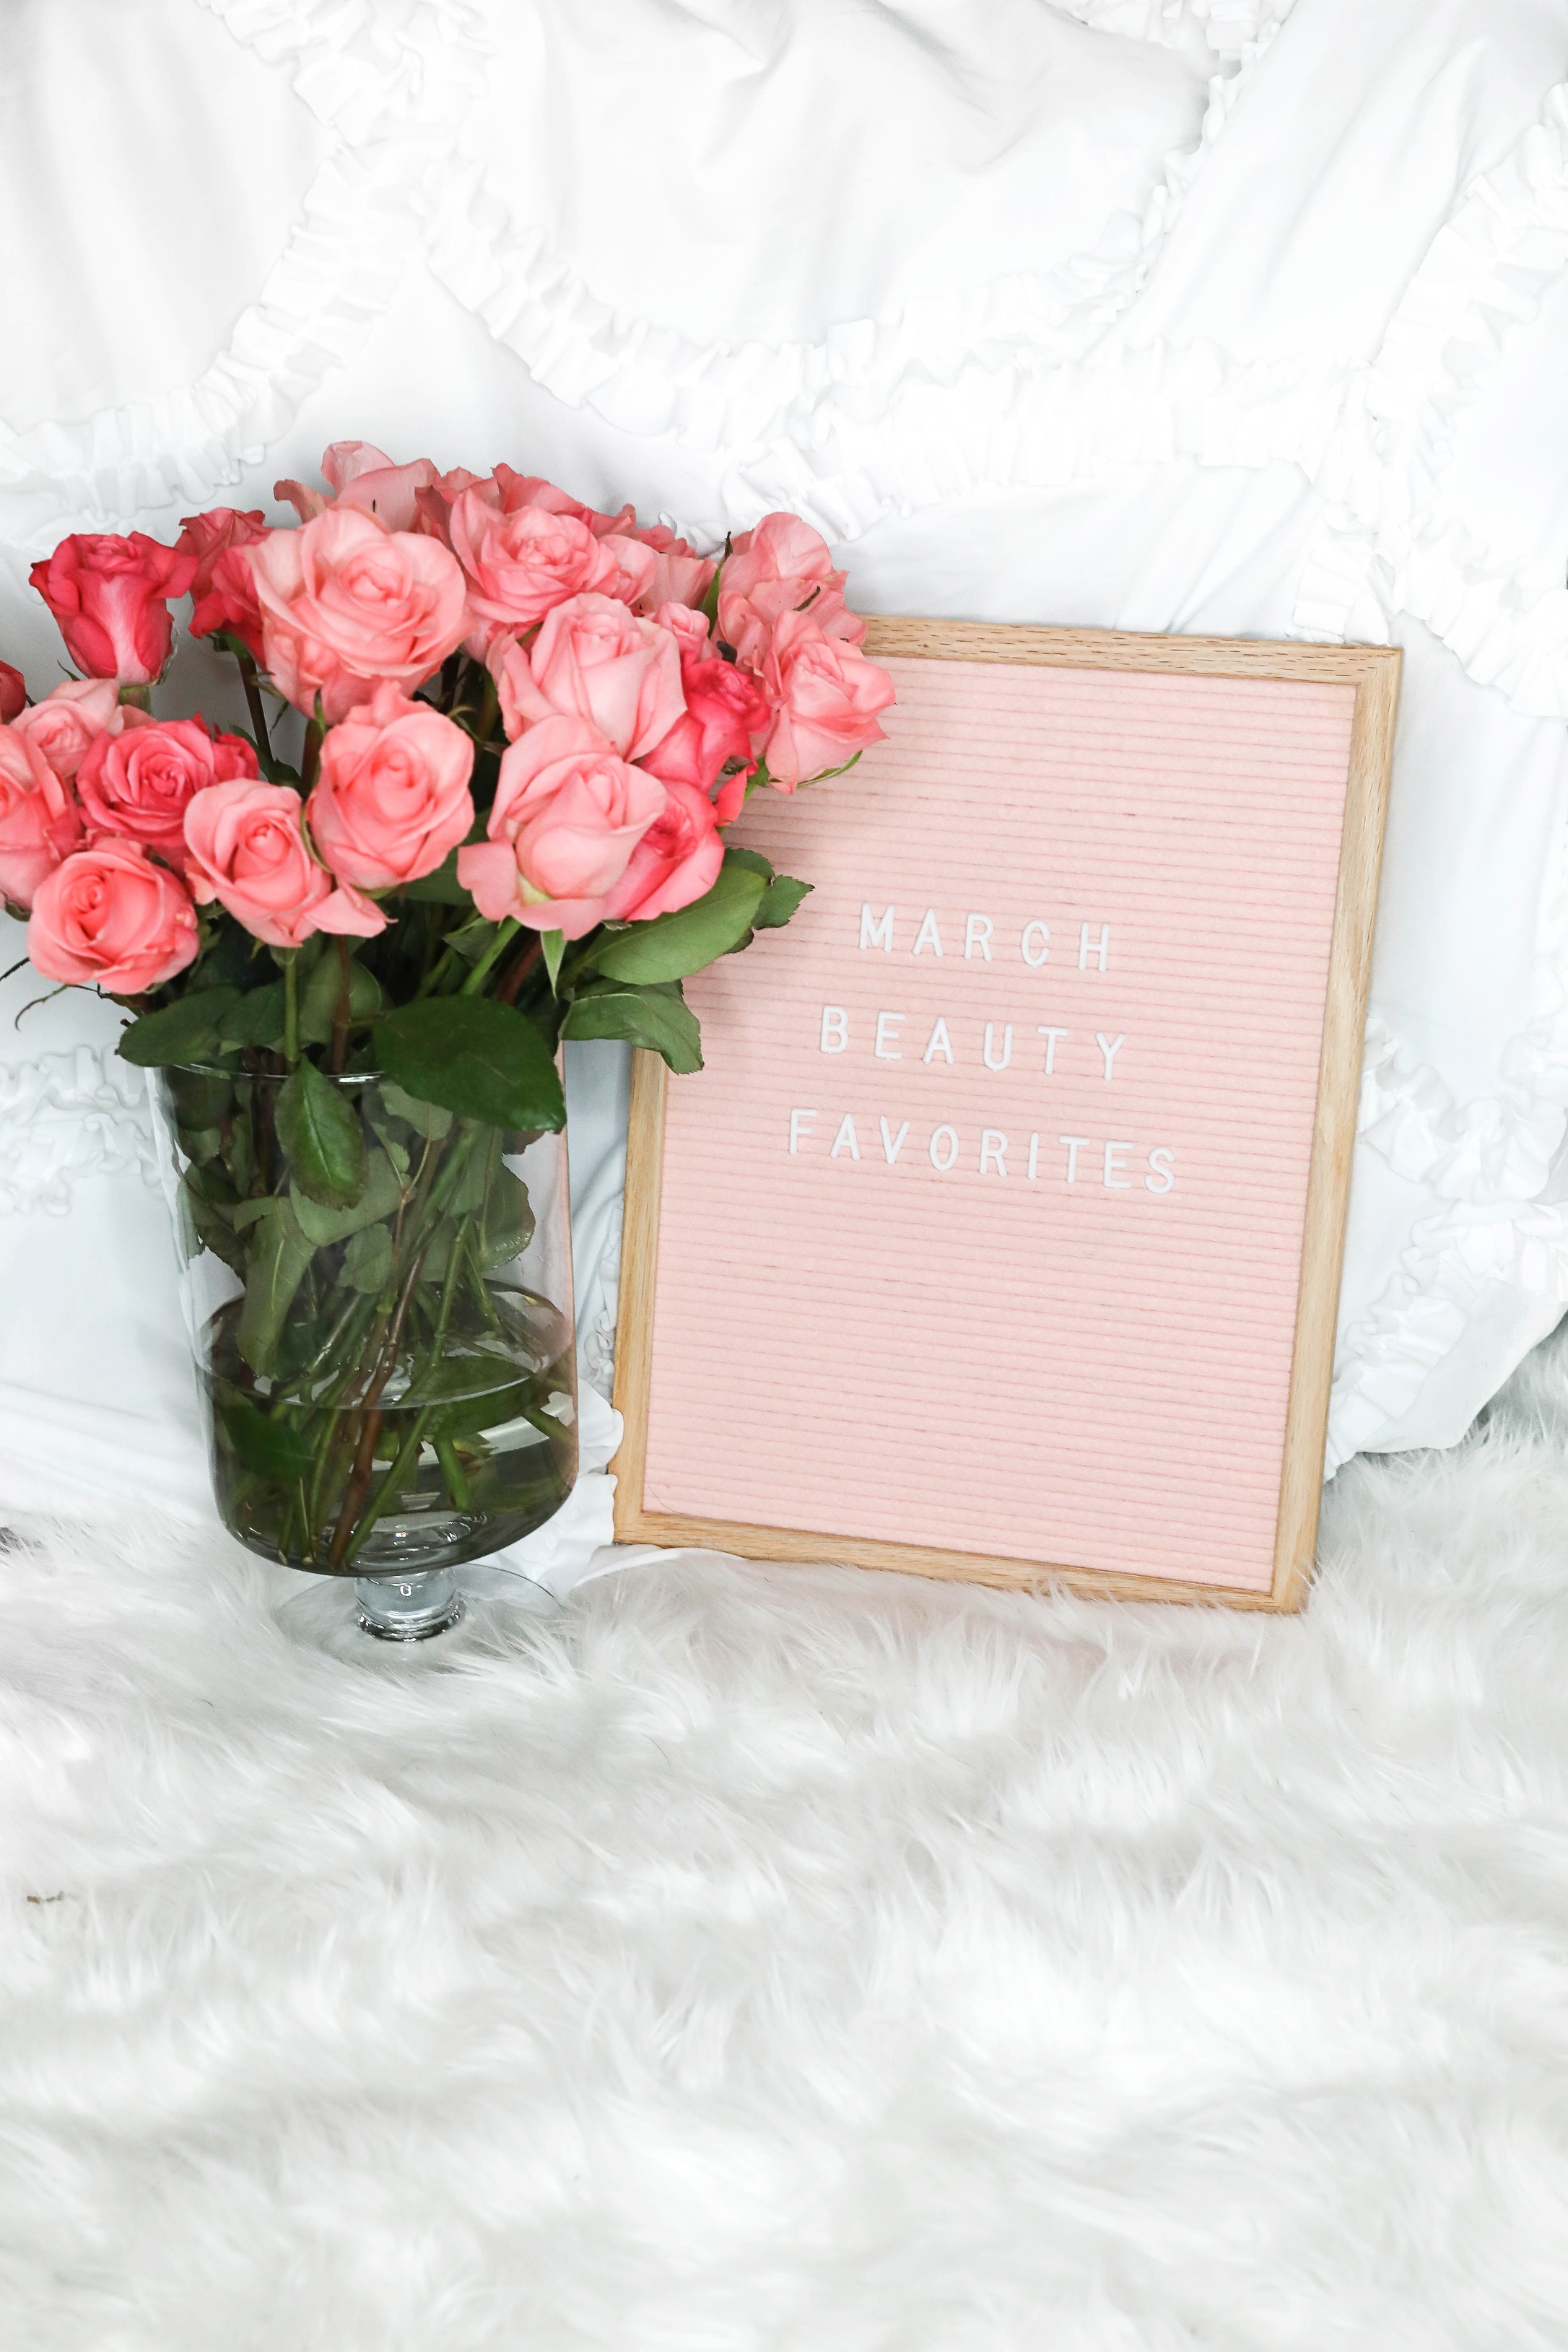 March beauty favorites daily dose of charm by lauren lindmark